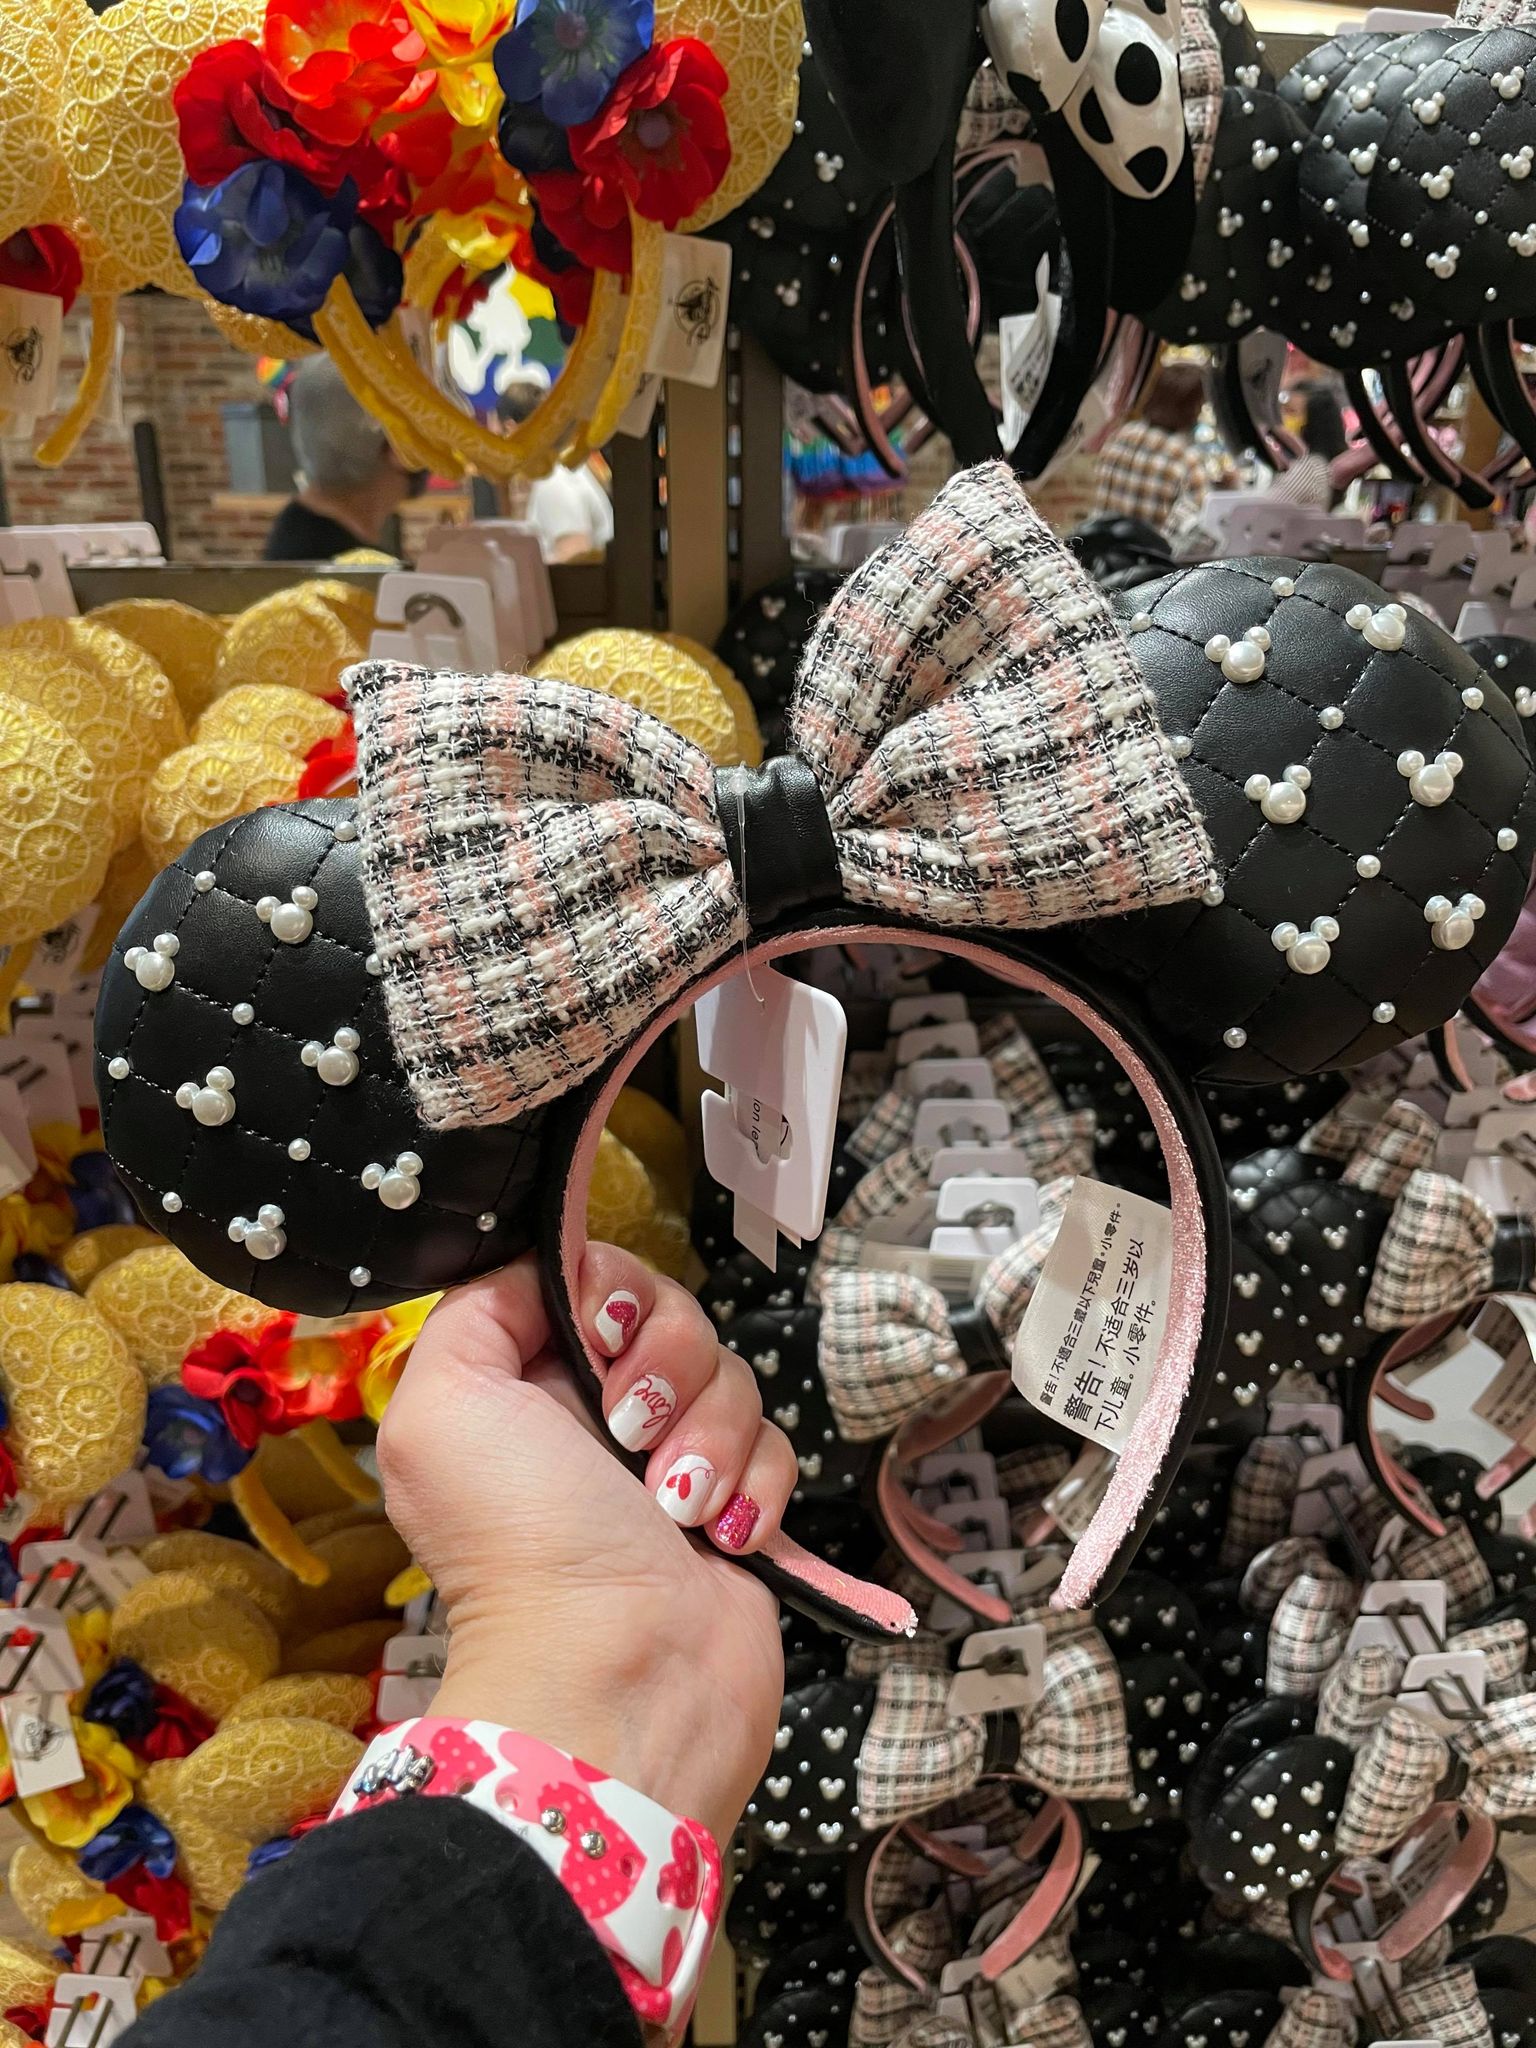 Disney's NEW Minnie Mouse Ears Keep it Classy with Tweed and Pearls! 